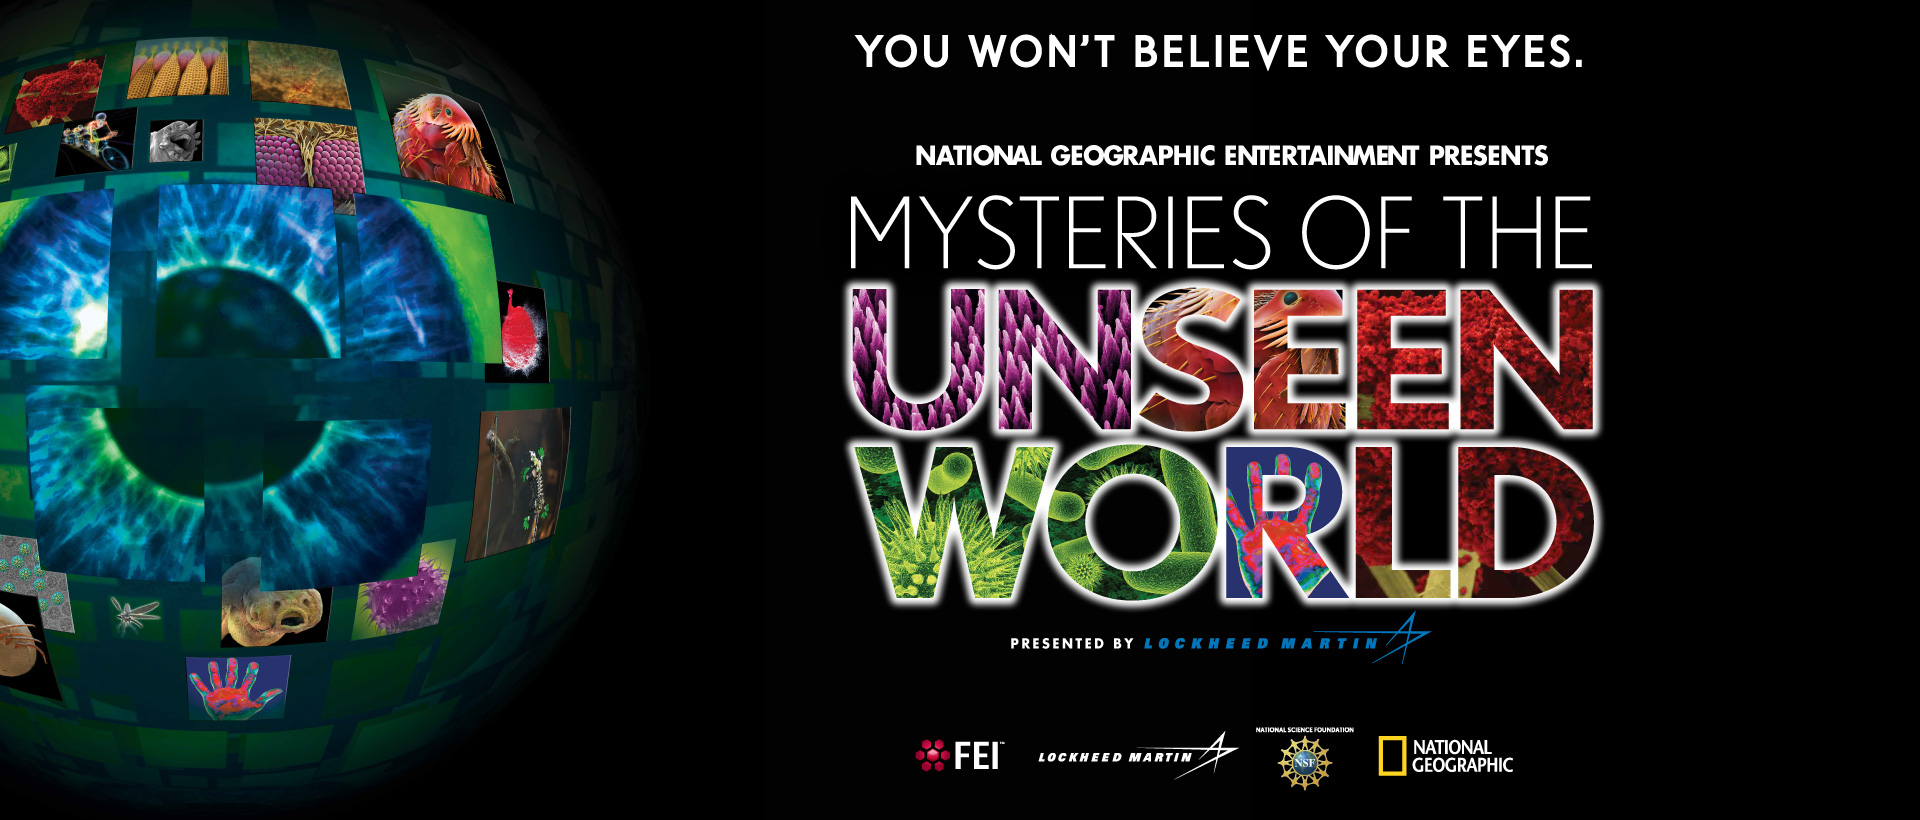 You won't believe your eyes! Mysteries of the Unseen World